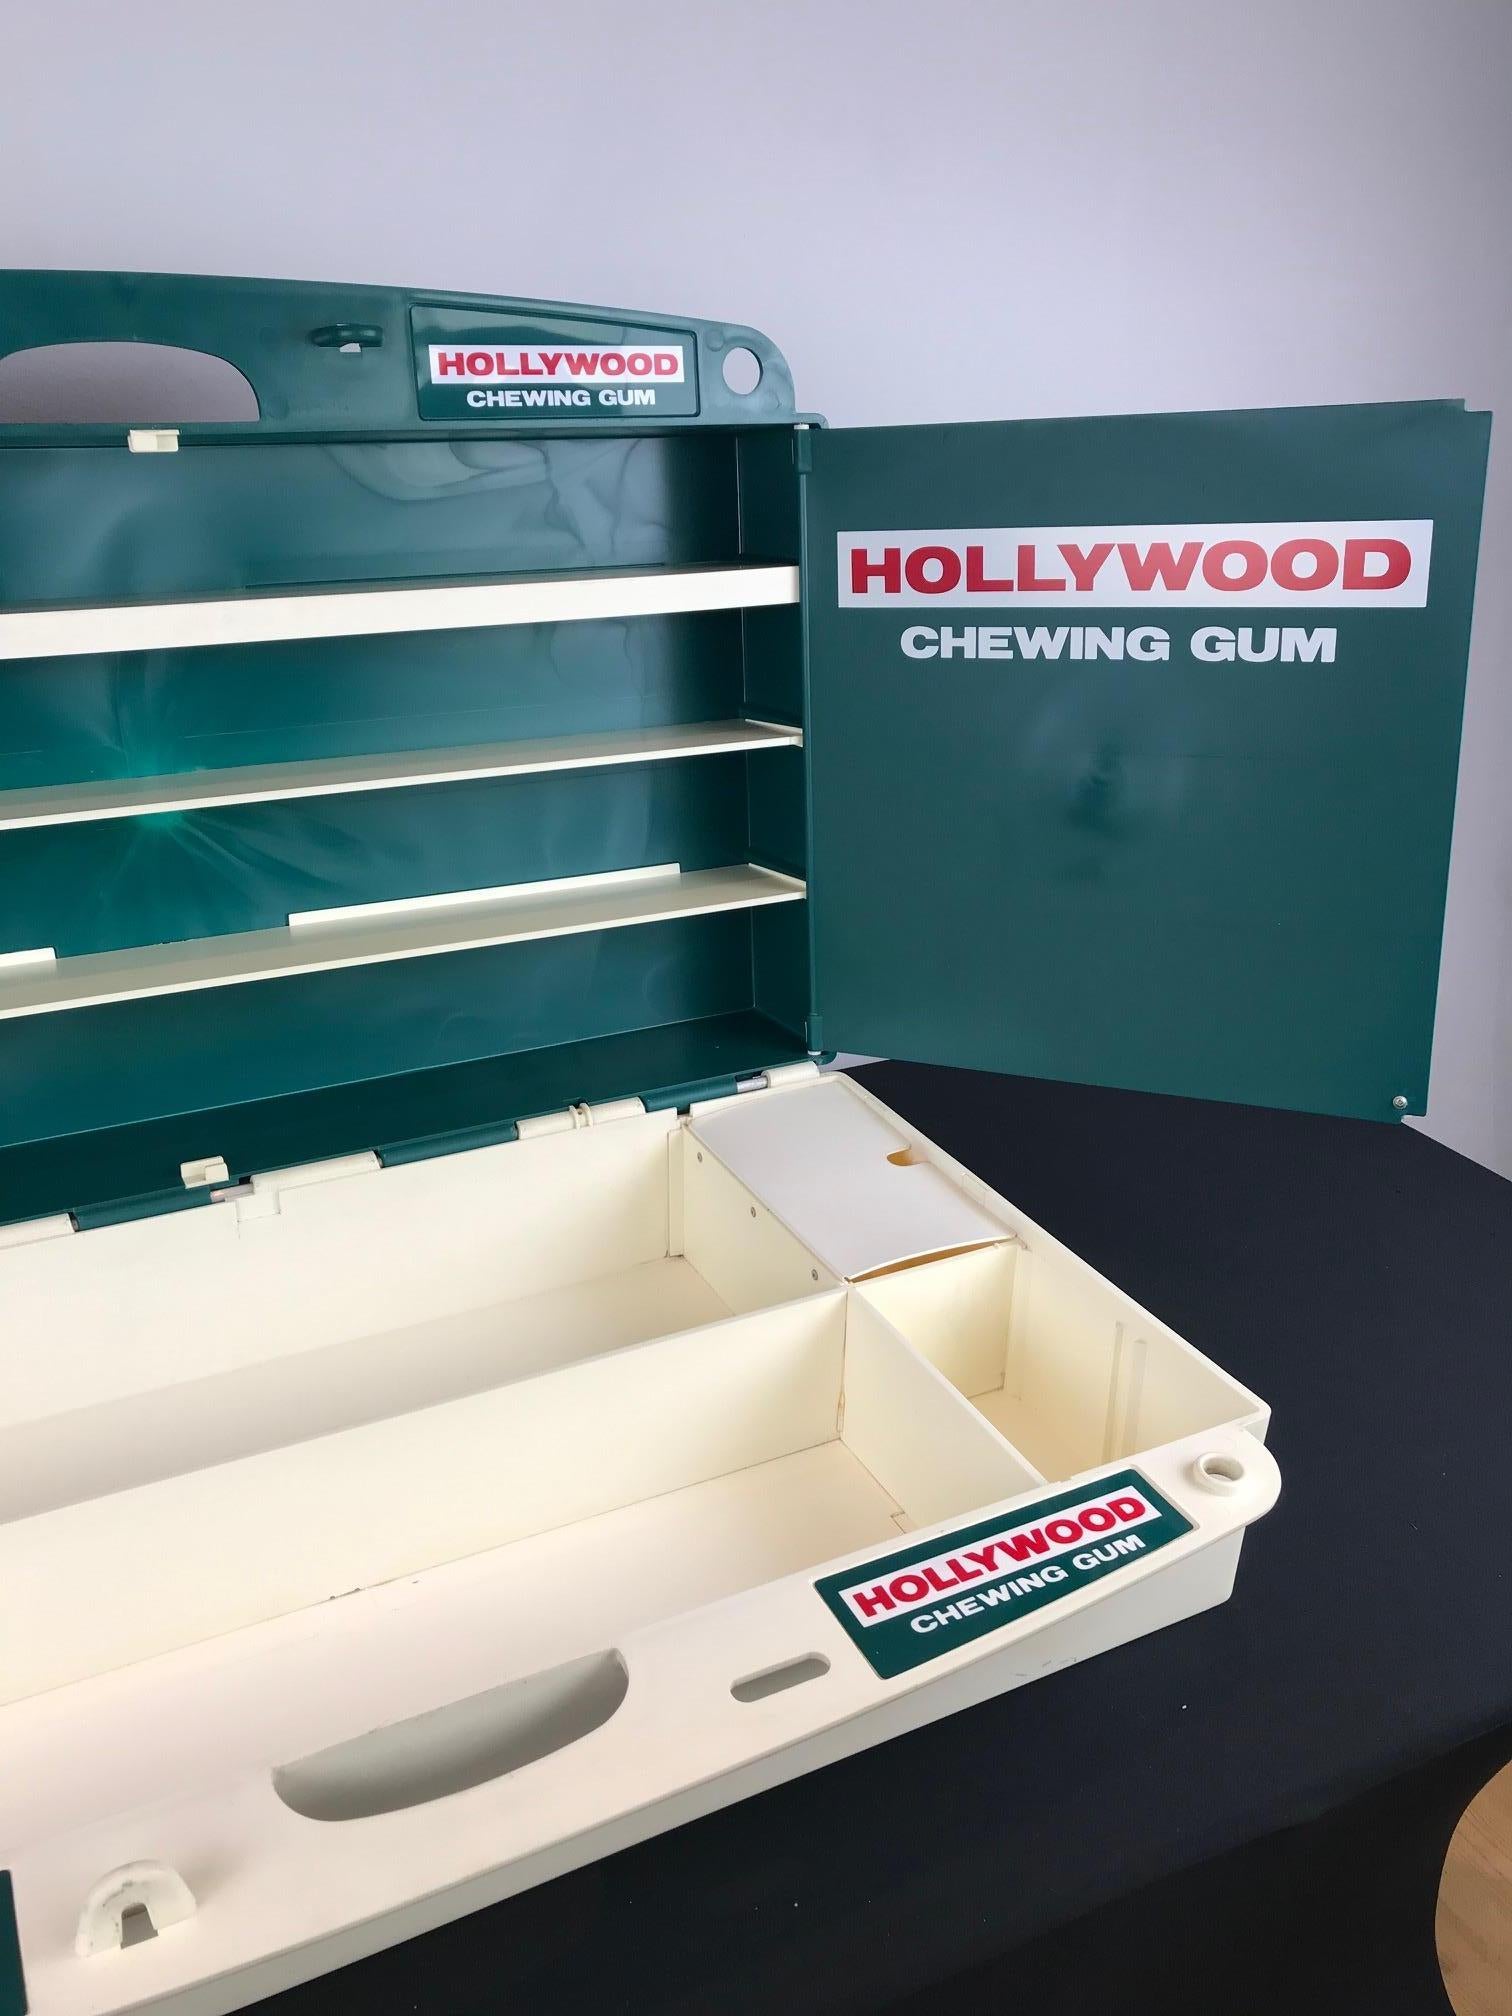 Large Hollywood Chewing Gum Advertising Display Suitcase For Sale 2